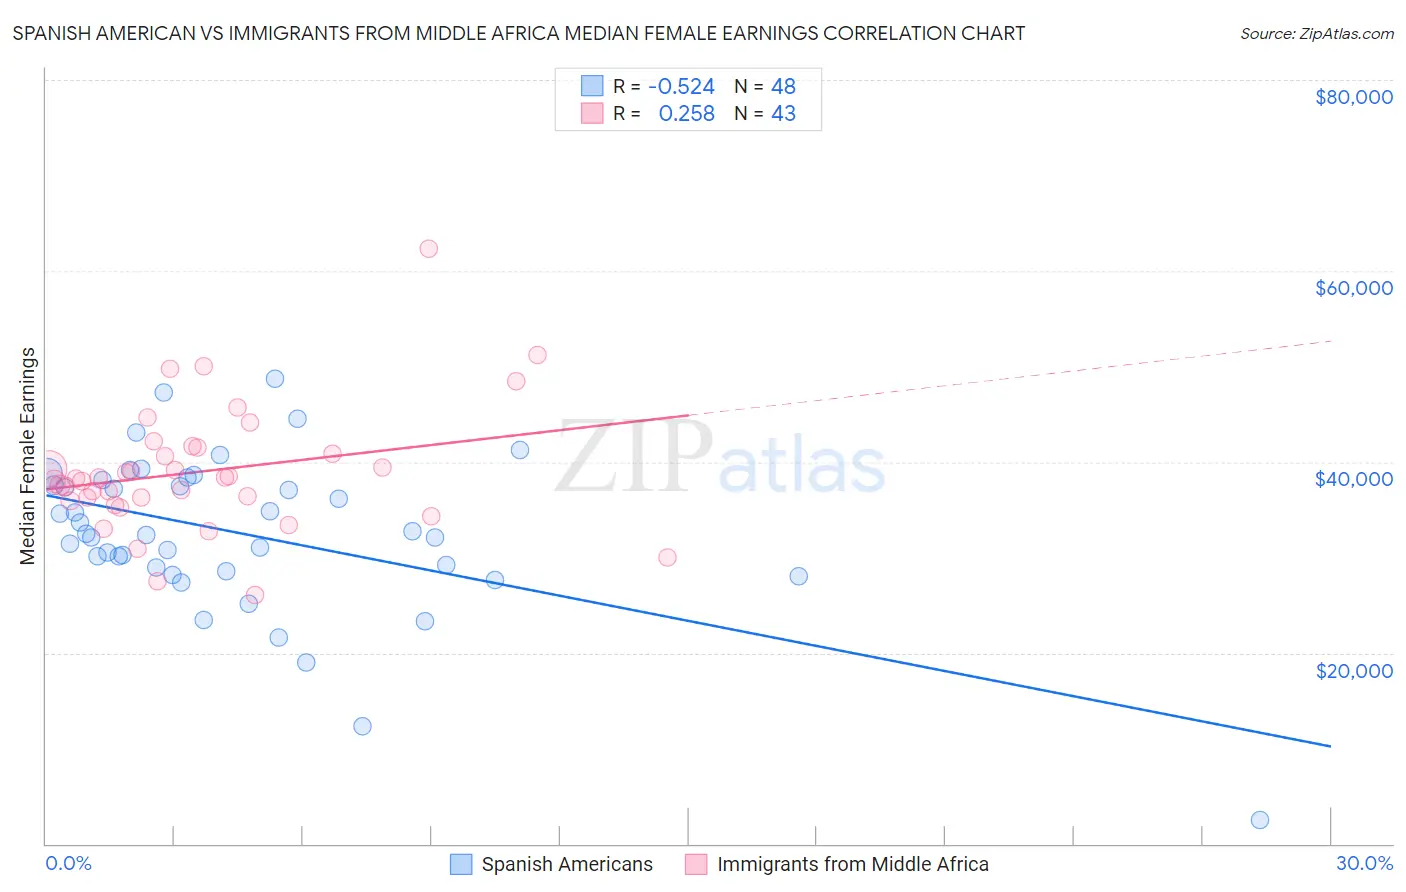 Spanish American vs Immigrants from Middle Africa Median Female Earnings